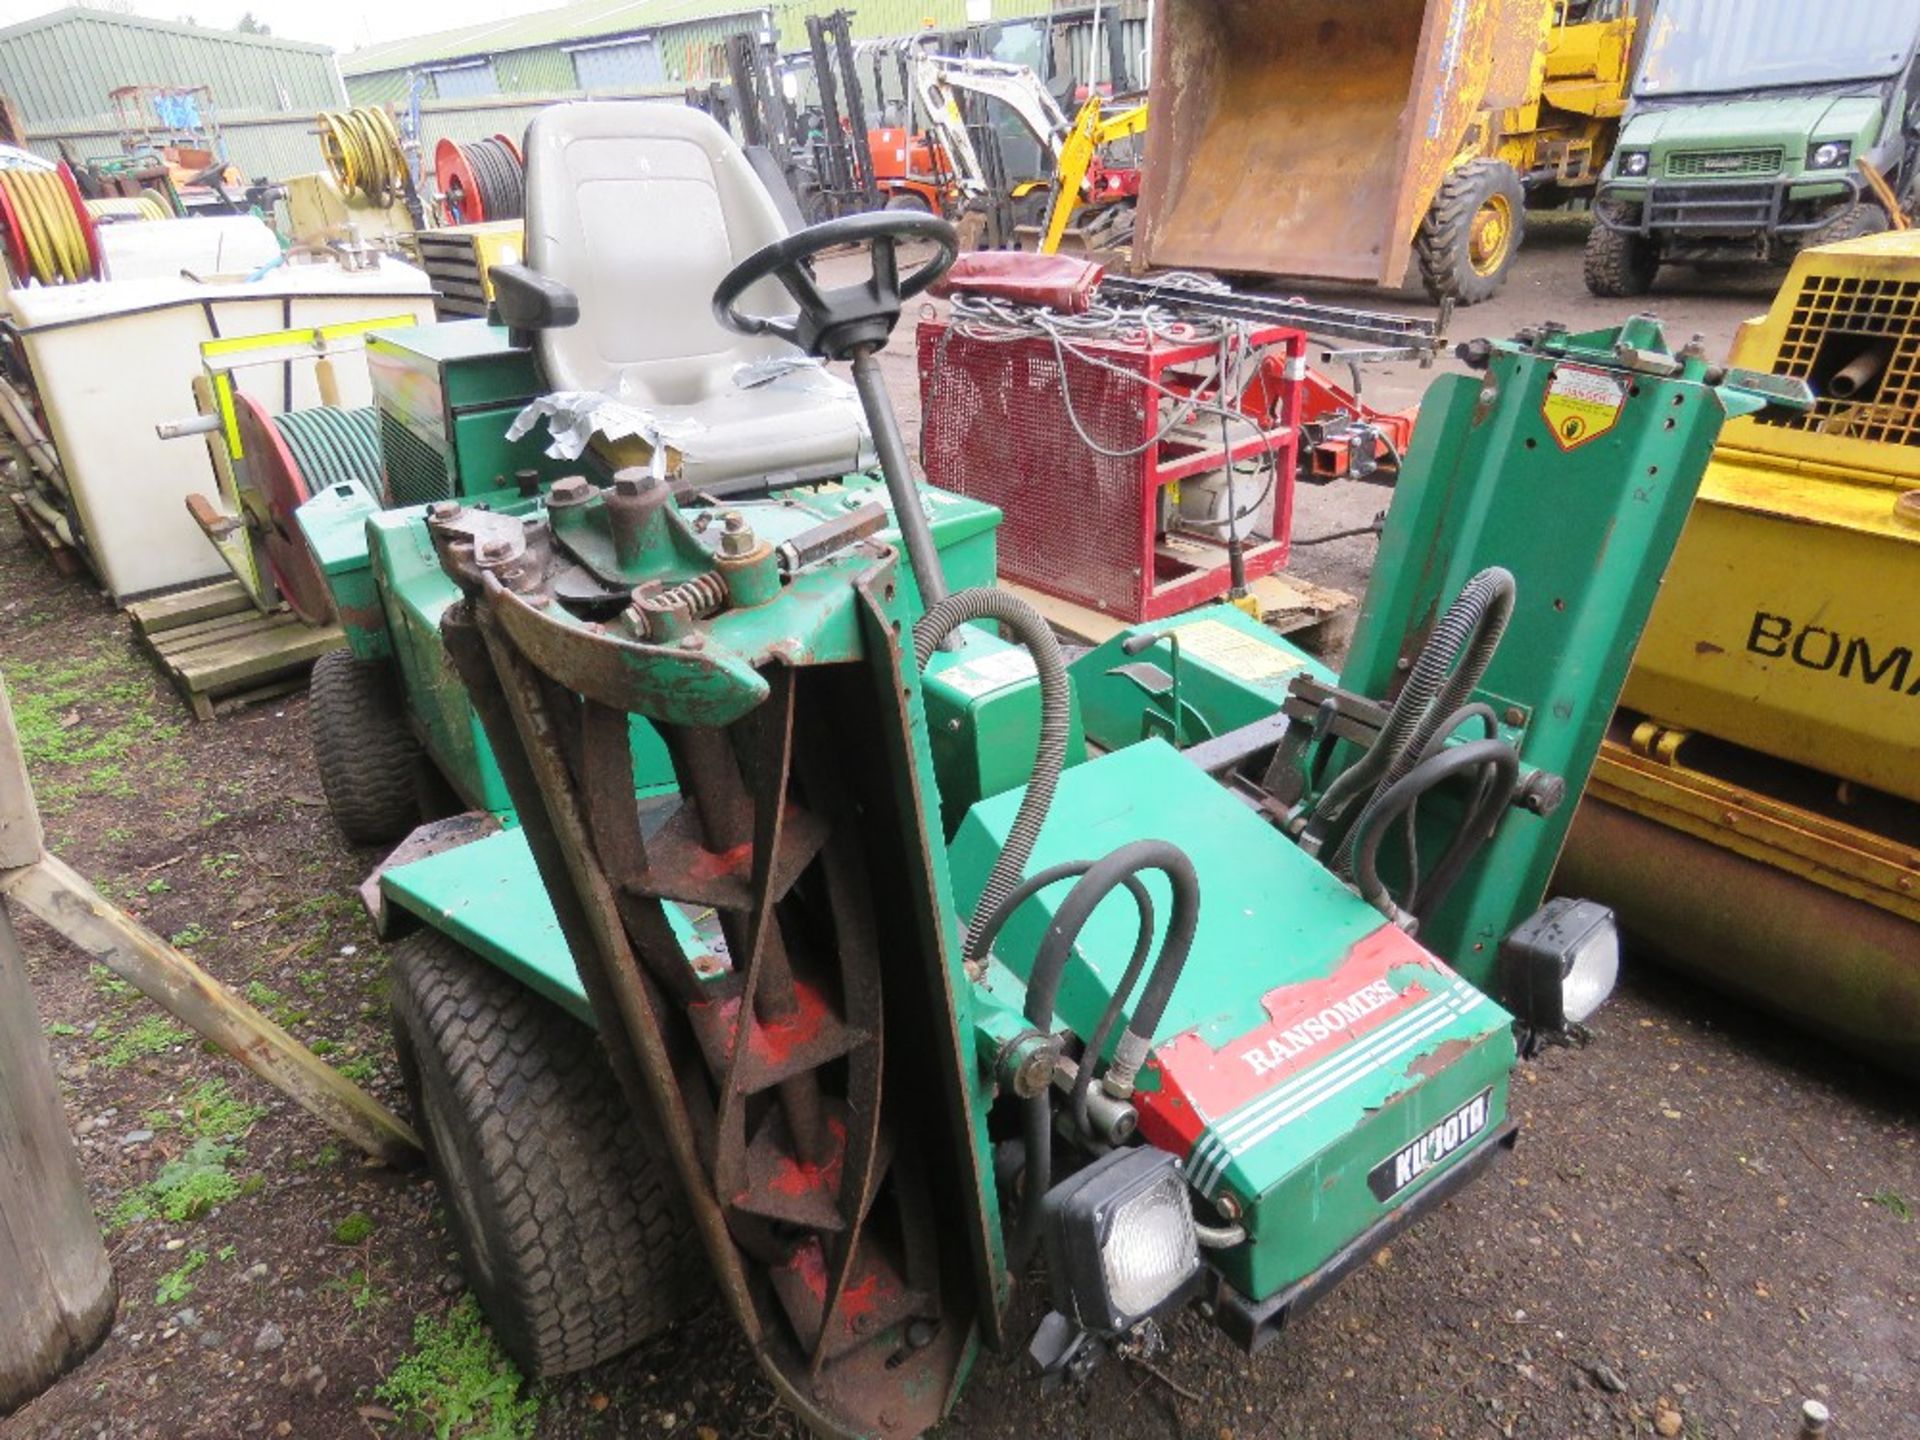 RANSOMES 213 TRIPLE RIDE ON CYLINDER MOWER WITH KUBOTA ENGINE. WHEN TESTED WAS SEEN TO RUN, DRIVE, M - Image 3 of 10